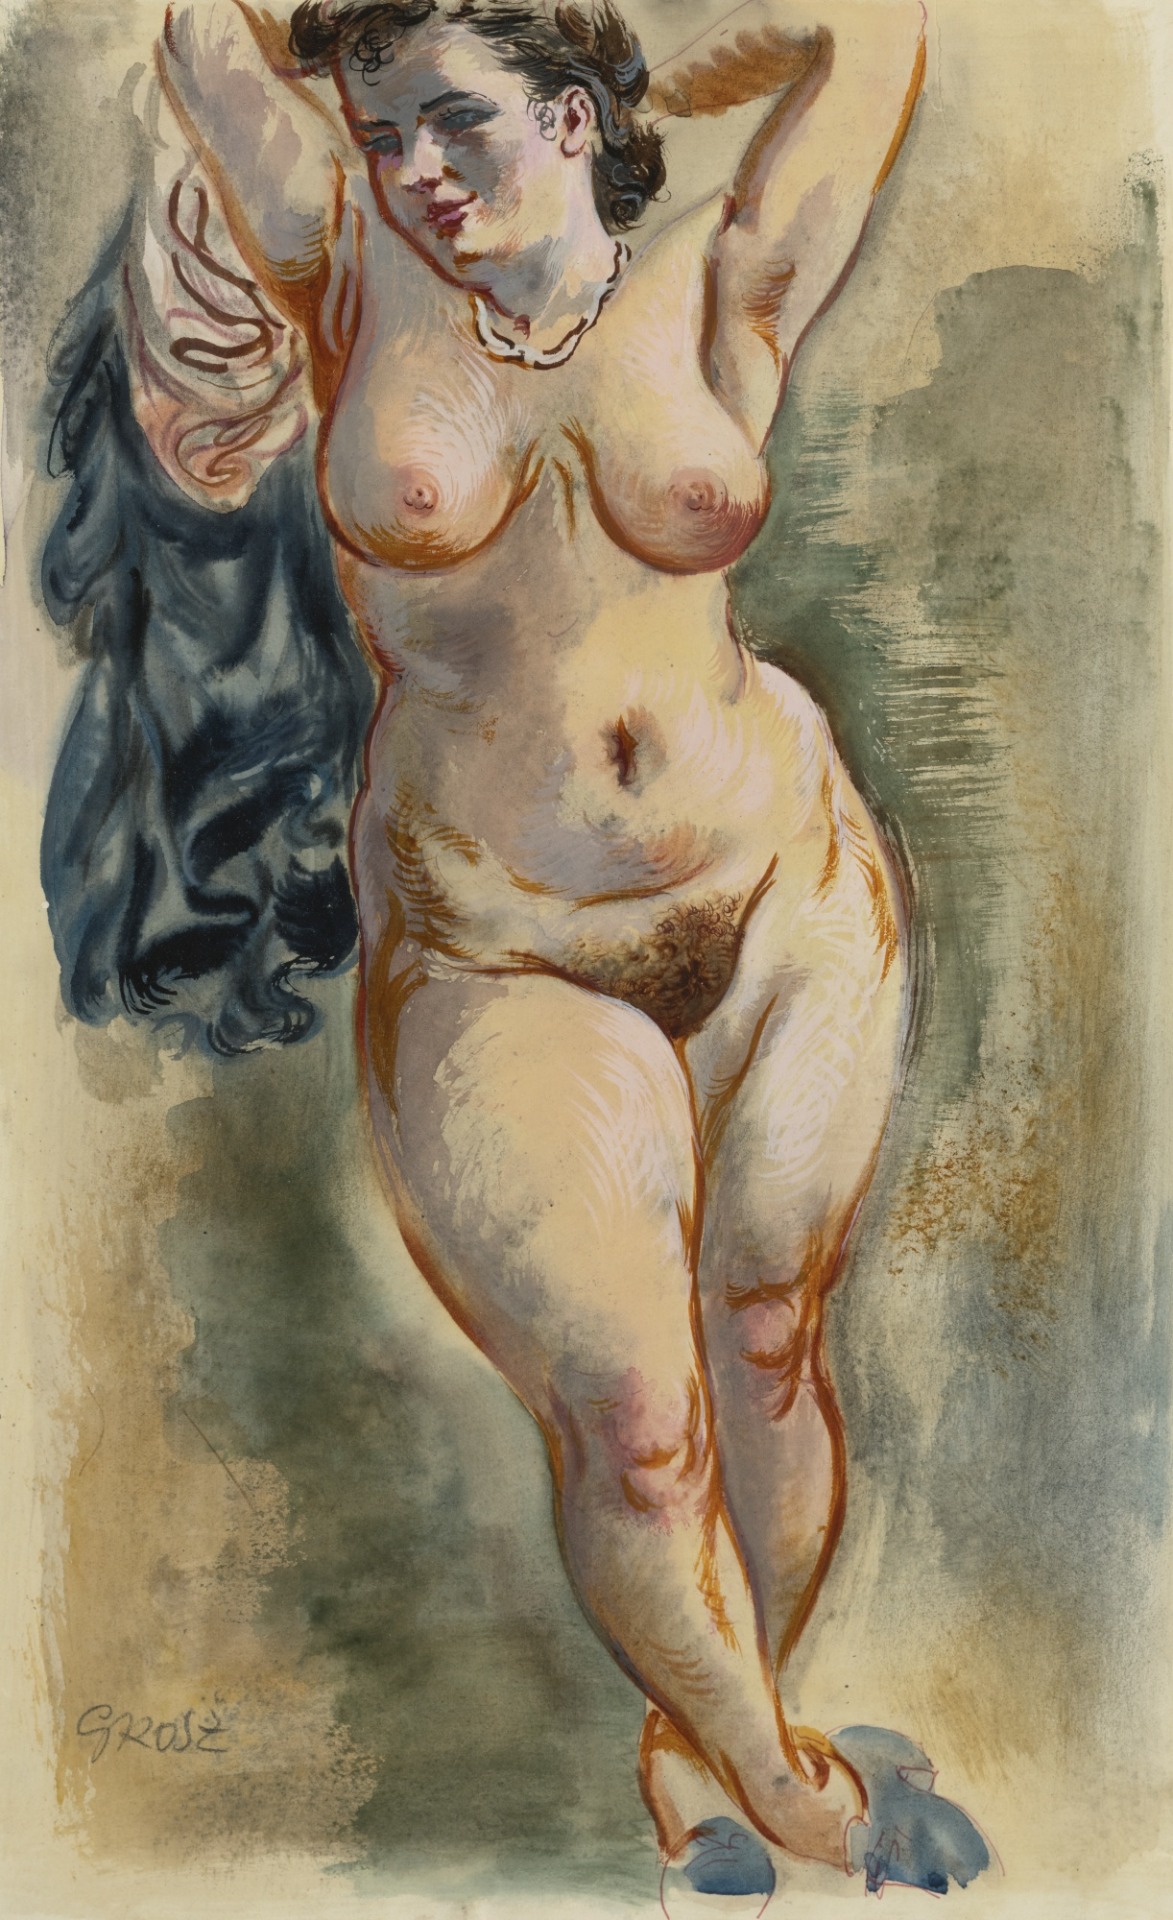 thunderstruck9: “George Grosz (German, 1893-1959), Standing female nude, 1940. Watercolour and gouache on paper, 58.5 x 39.7 cm. ”